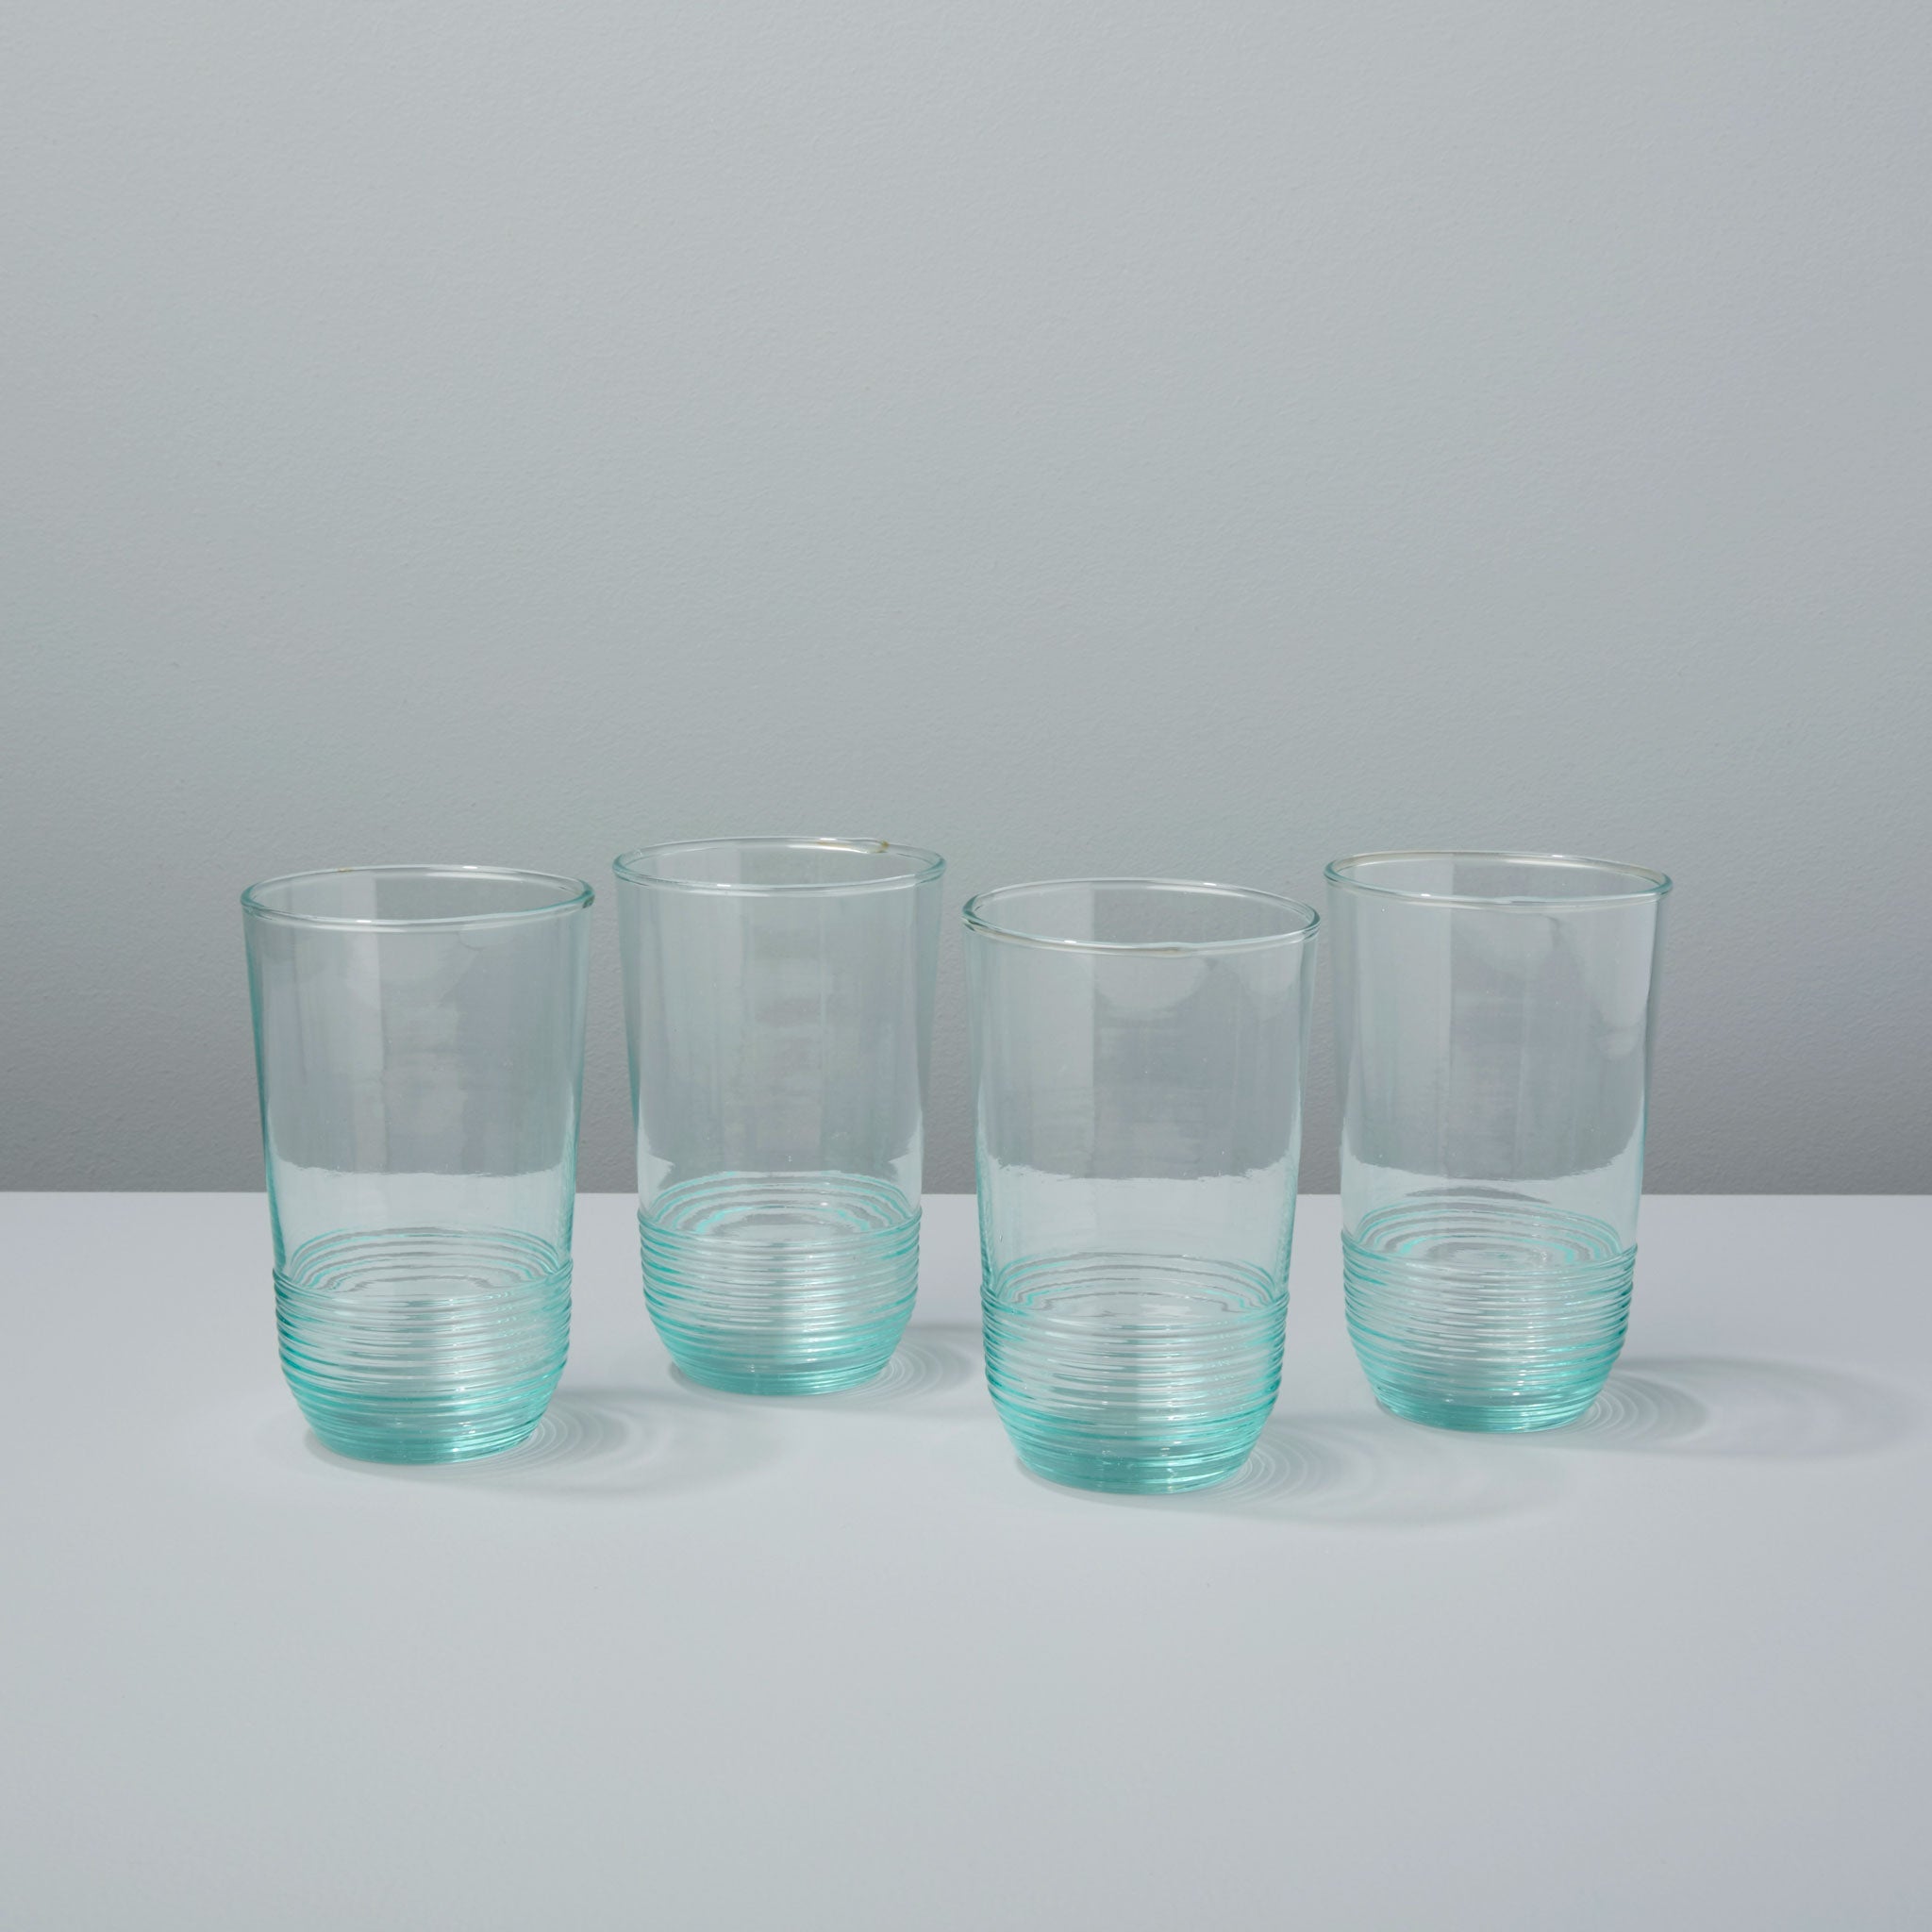 Premium Recycled Tall Ripple Tumbler, Set of 4